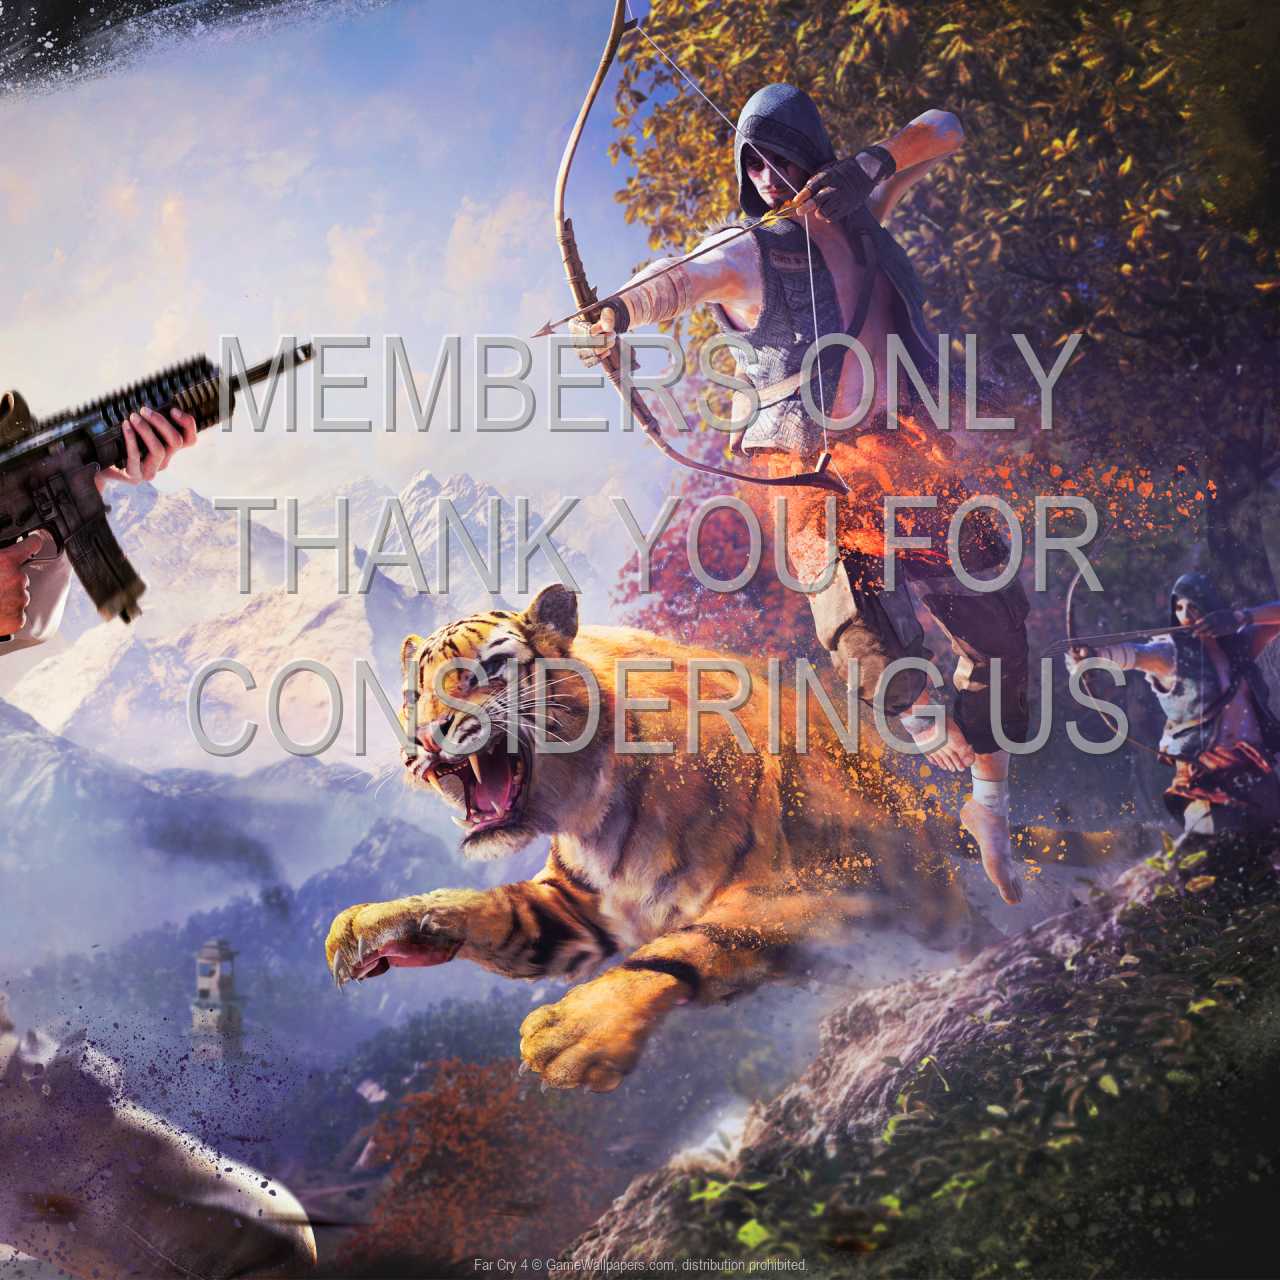 Far Cry 4 720p Horizontal Mobile wallpaper or background 05